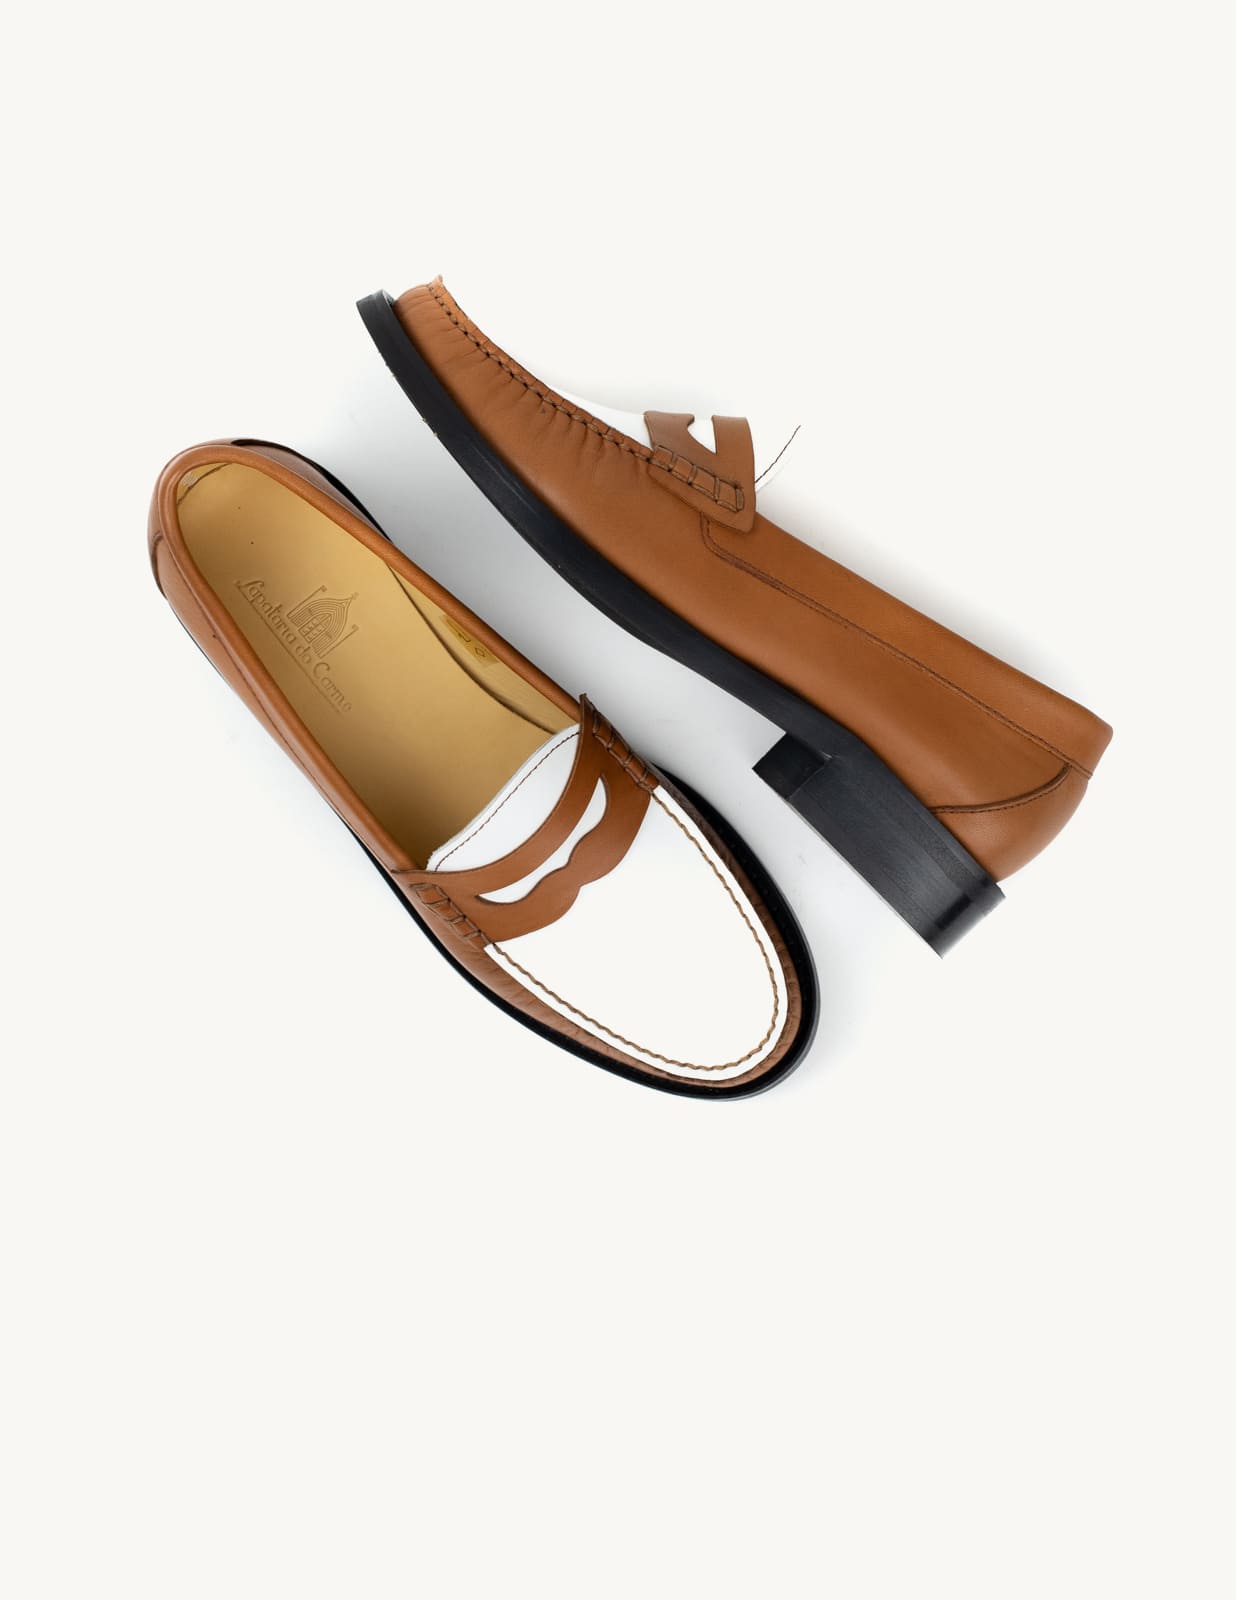 Loafer bicolor made in Portugal